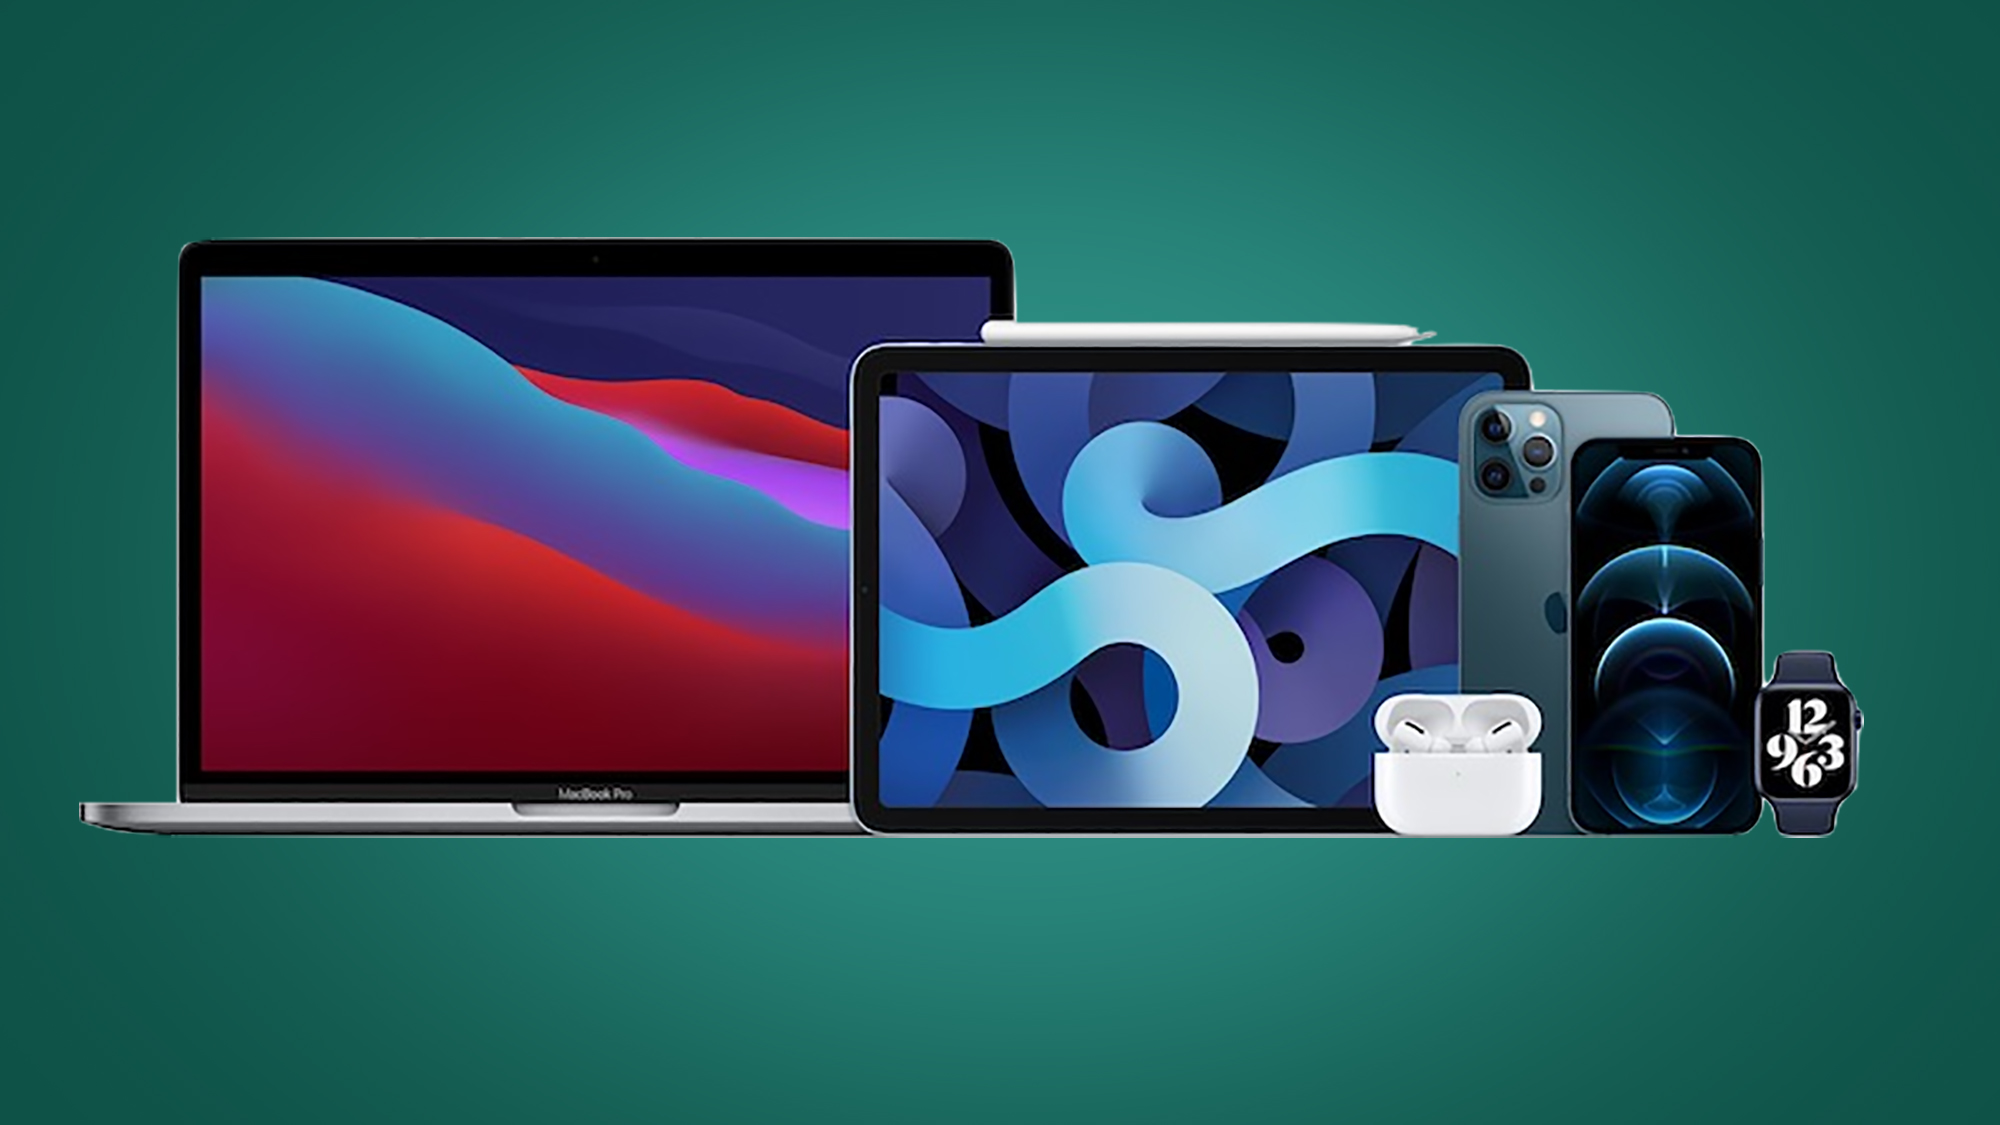 MacBook, iPad, Airpods and other devices on a plain background